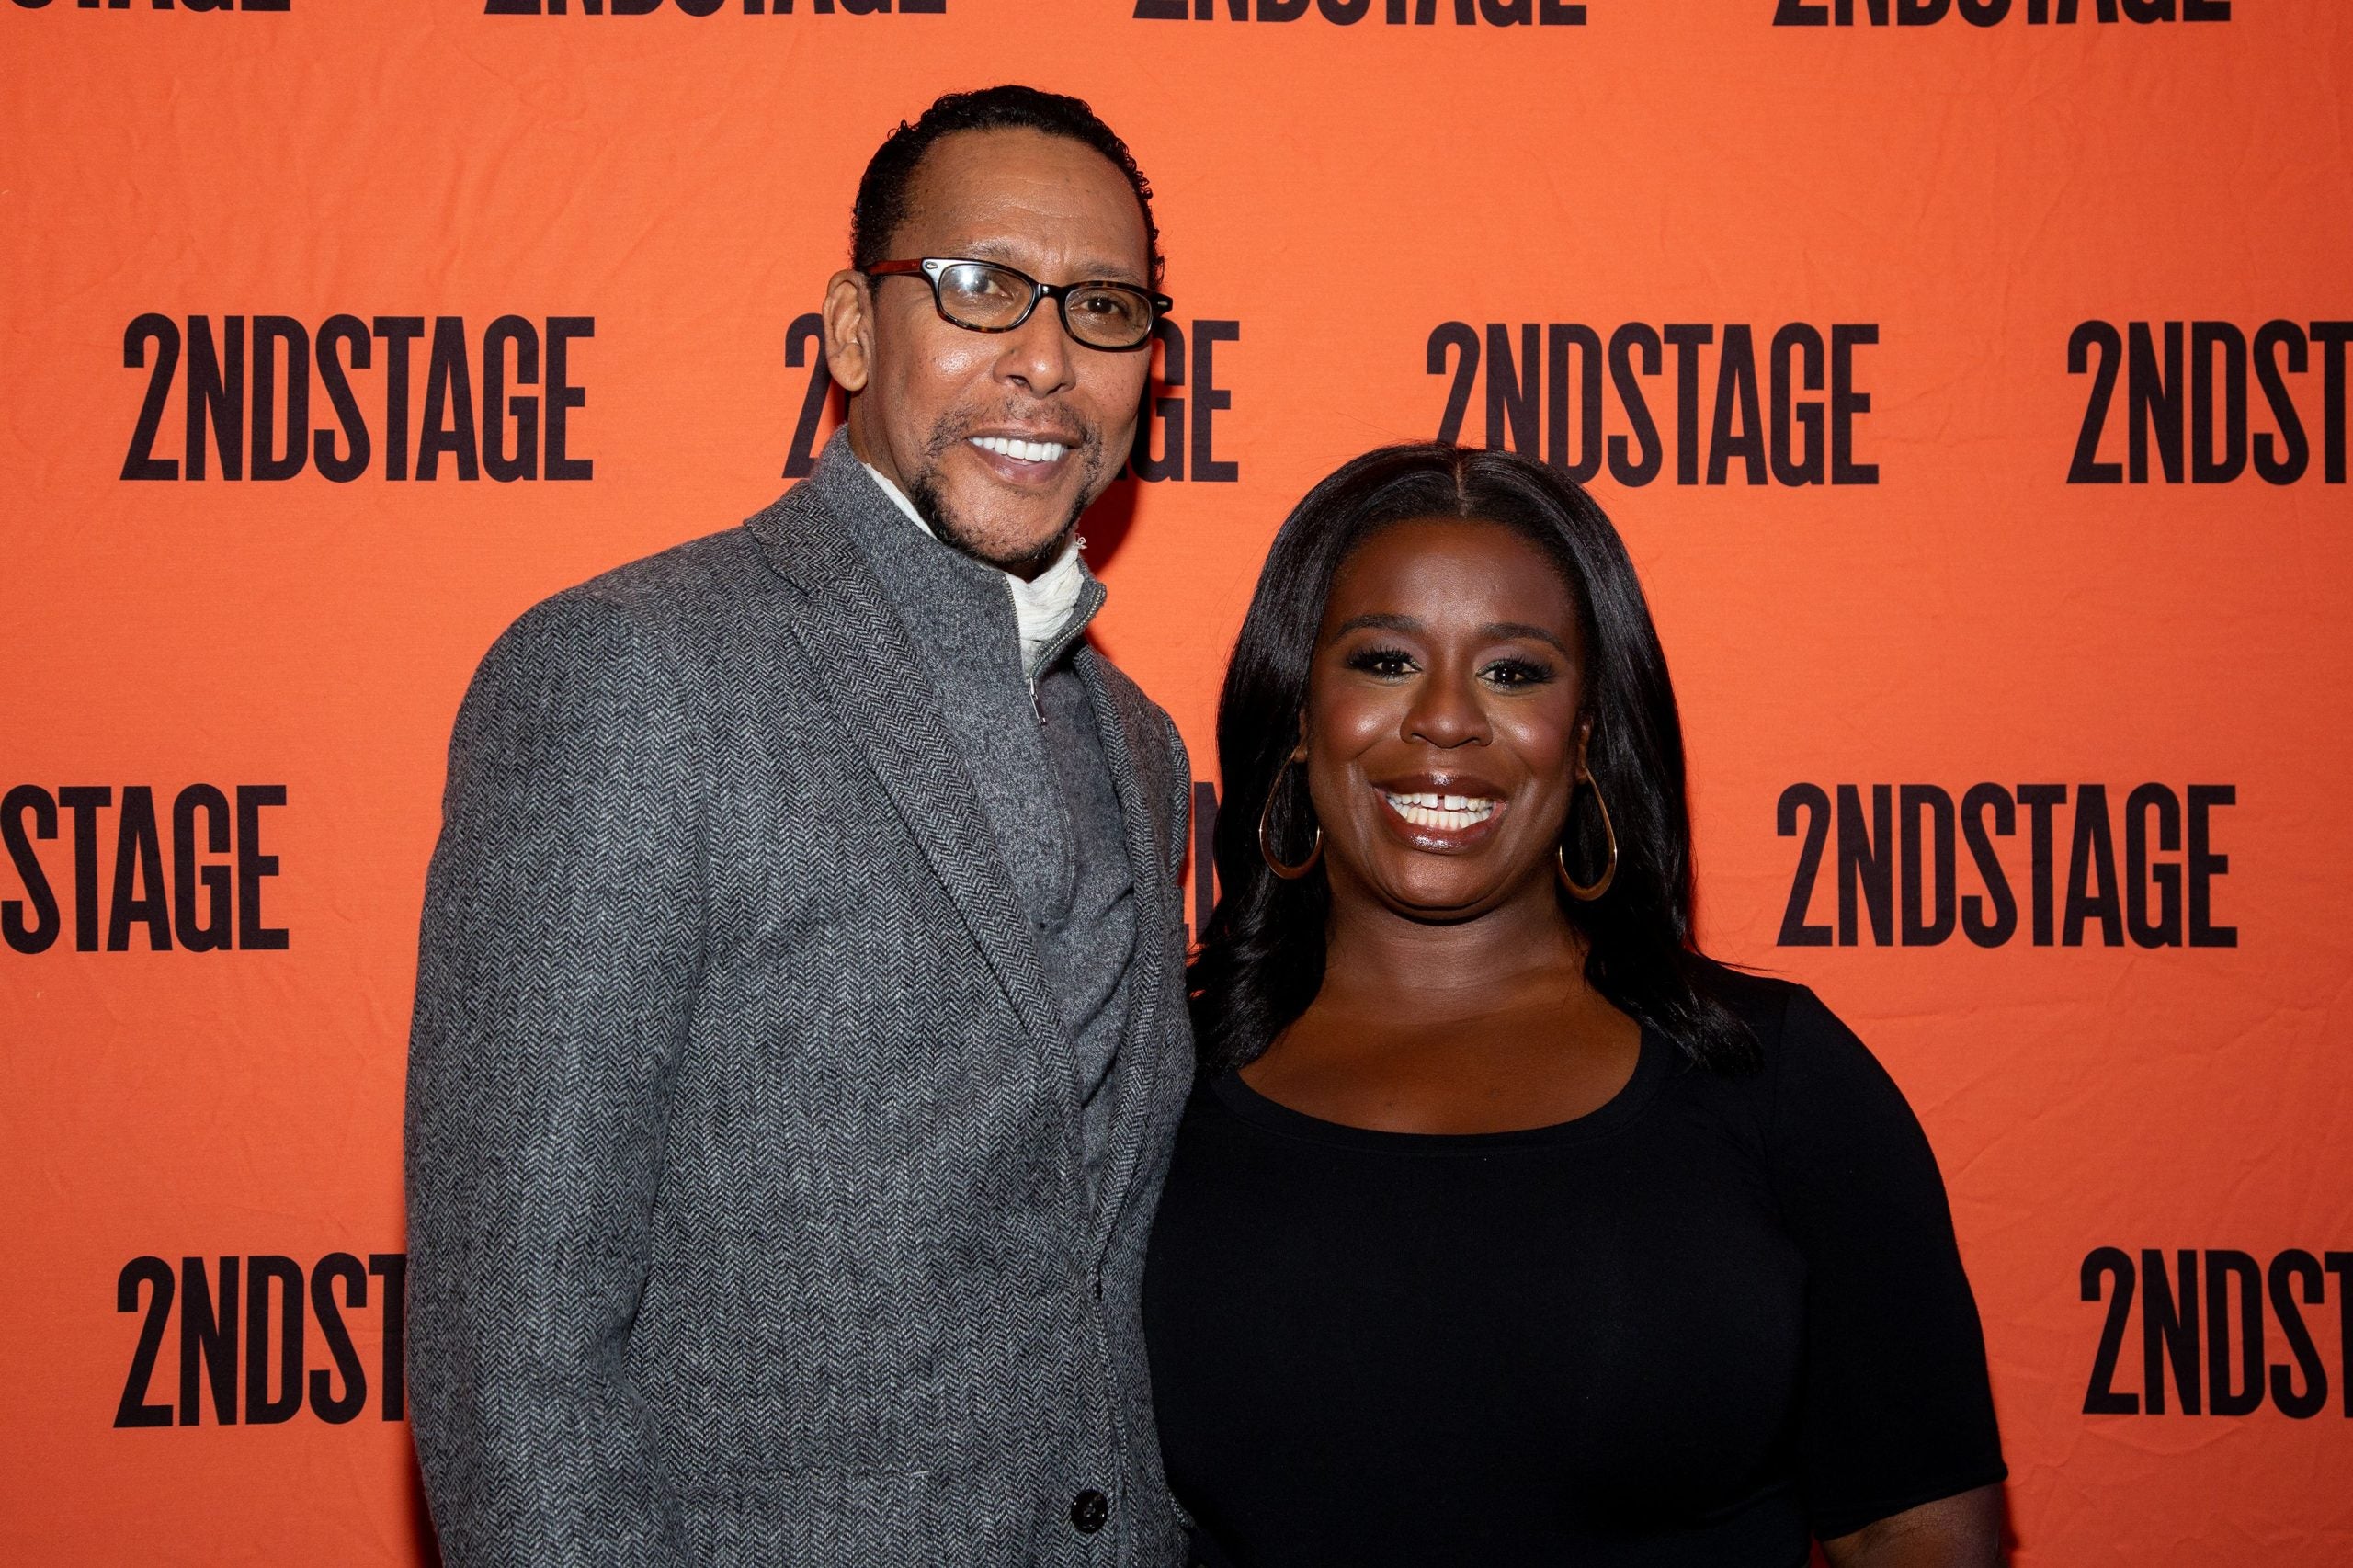 Uzo Aduba And Ron Cephas Jones Show The Power Of Redemption In Lynn Nottage’s ‘Clyde’s’